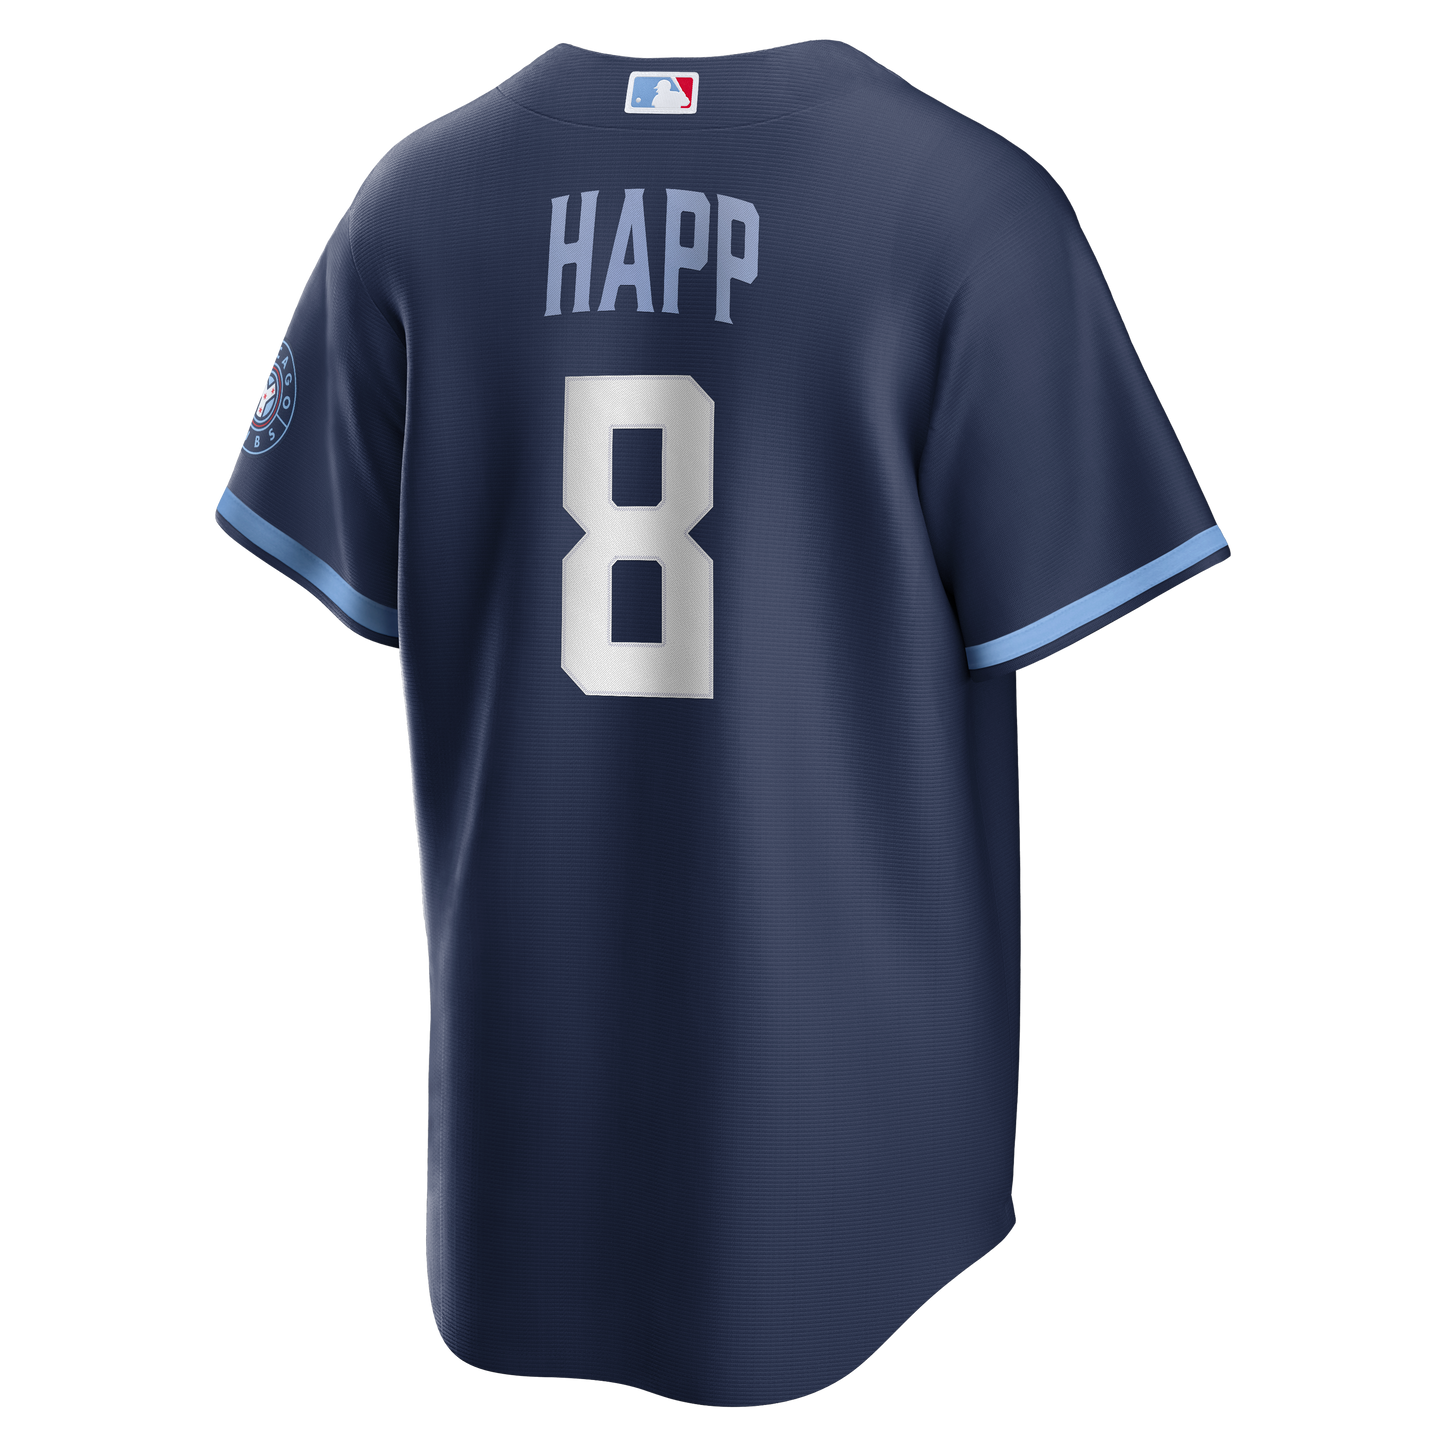 Ian Happ Chicago Cubs Nike City Connect Wrigleyville Jersey